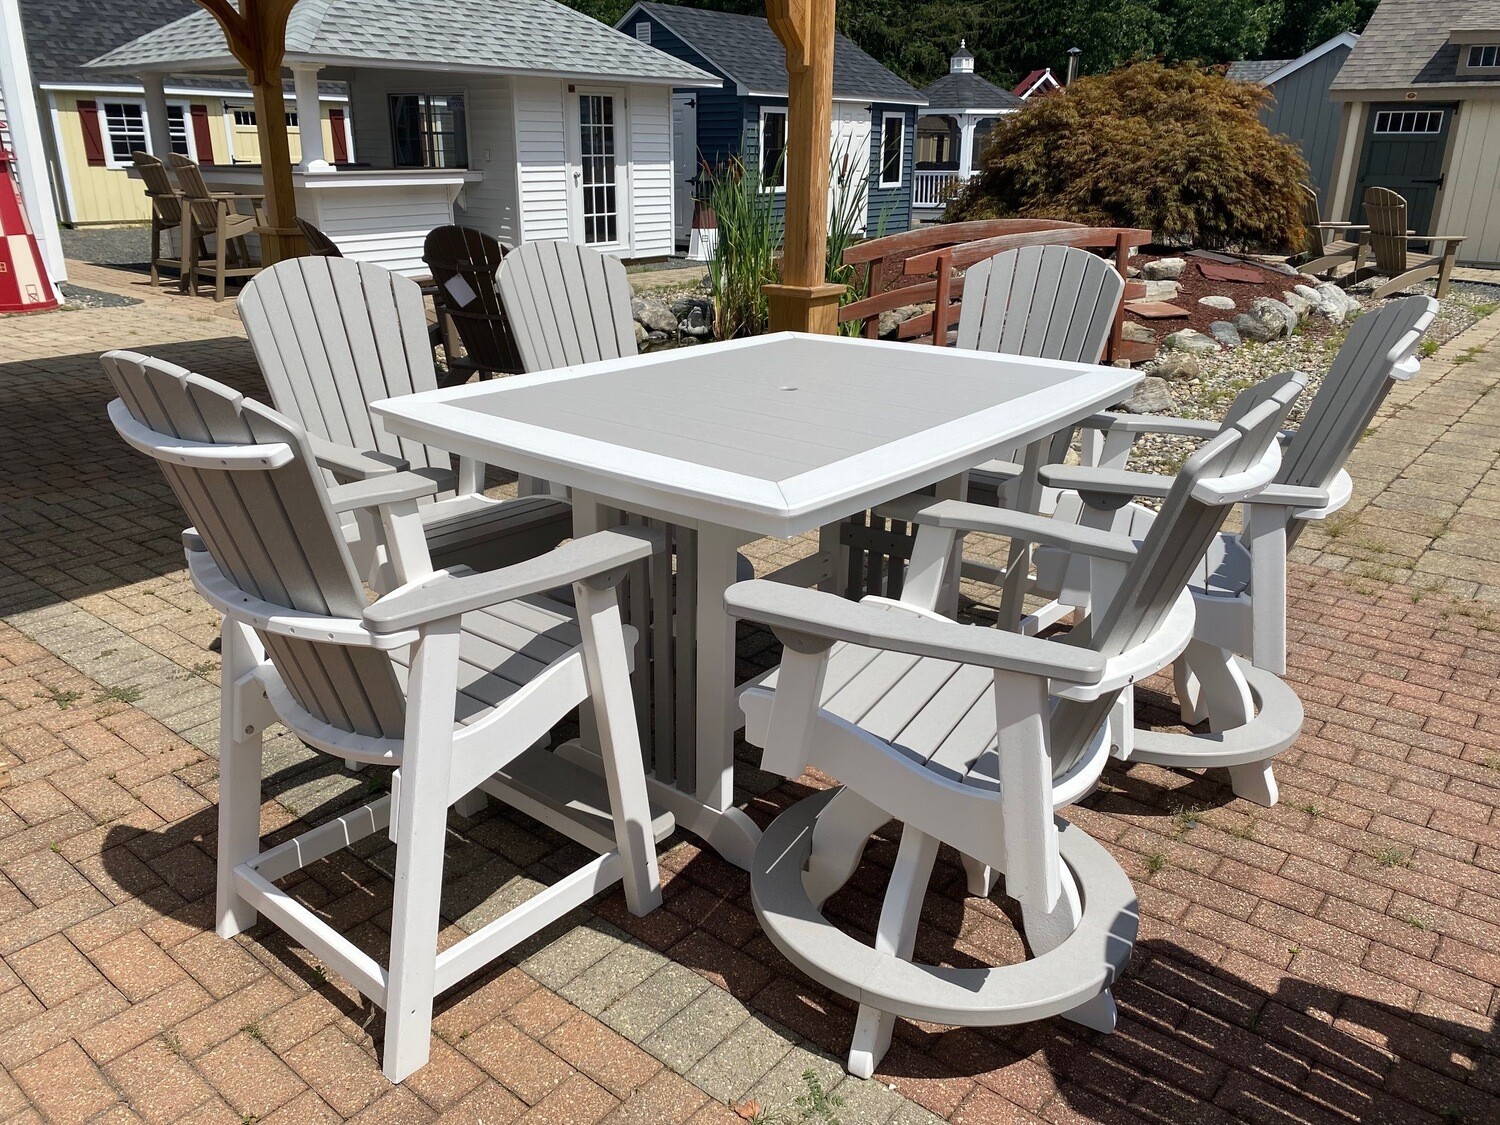 ​45” x 60” Poly Mission Table Balcony - $4,293